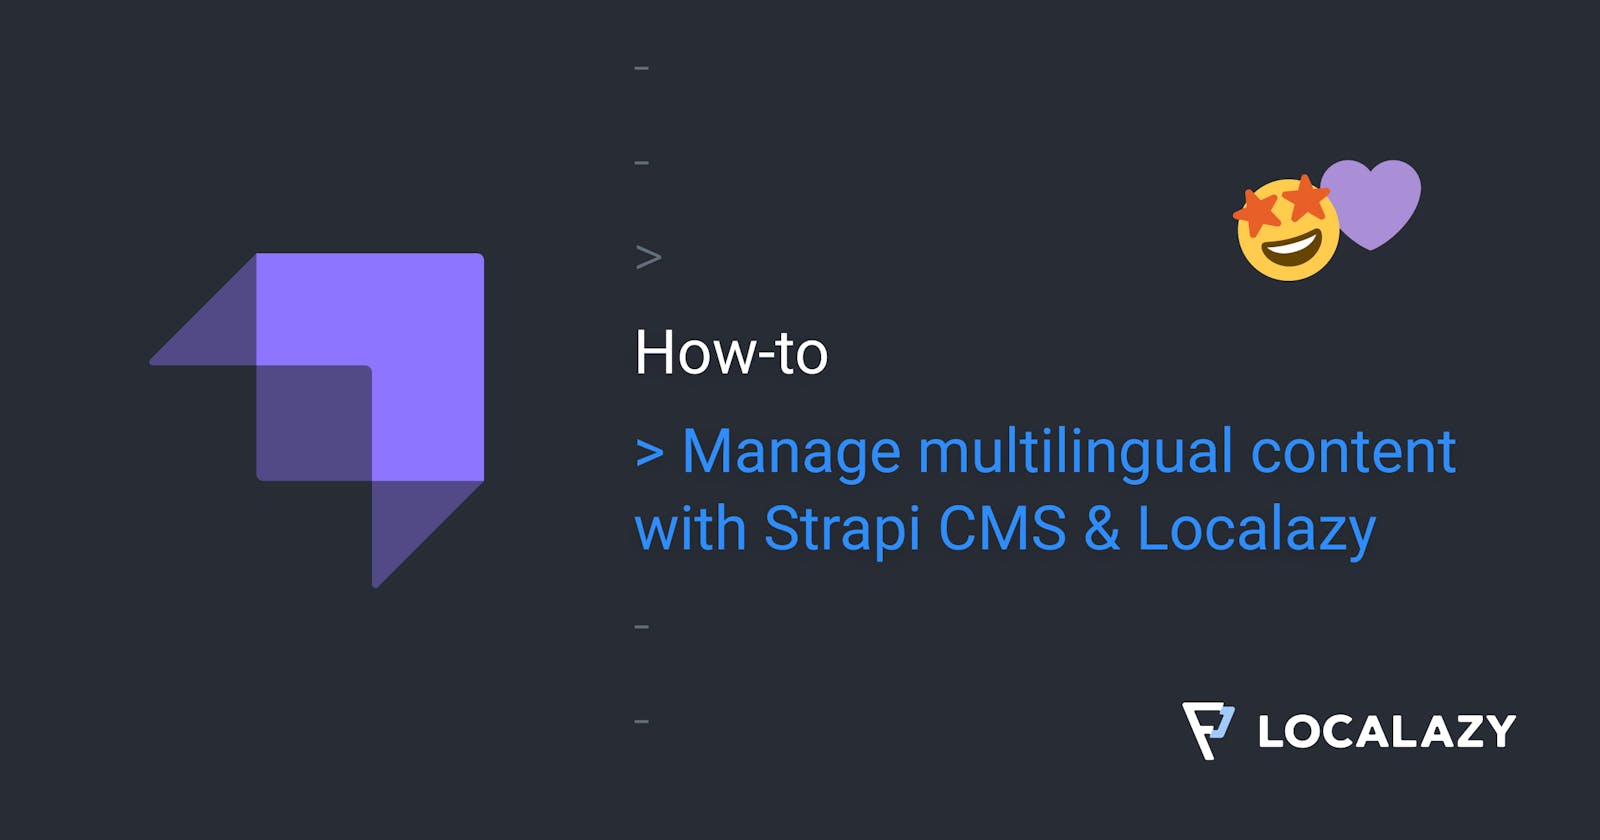 Managing multilingual content with Strapi CMS & Localazy